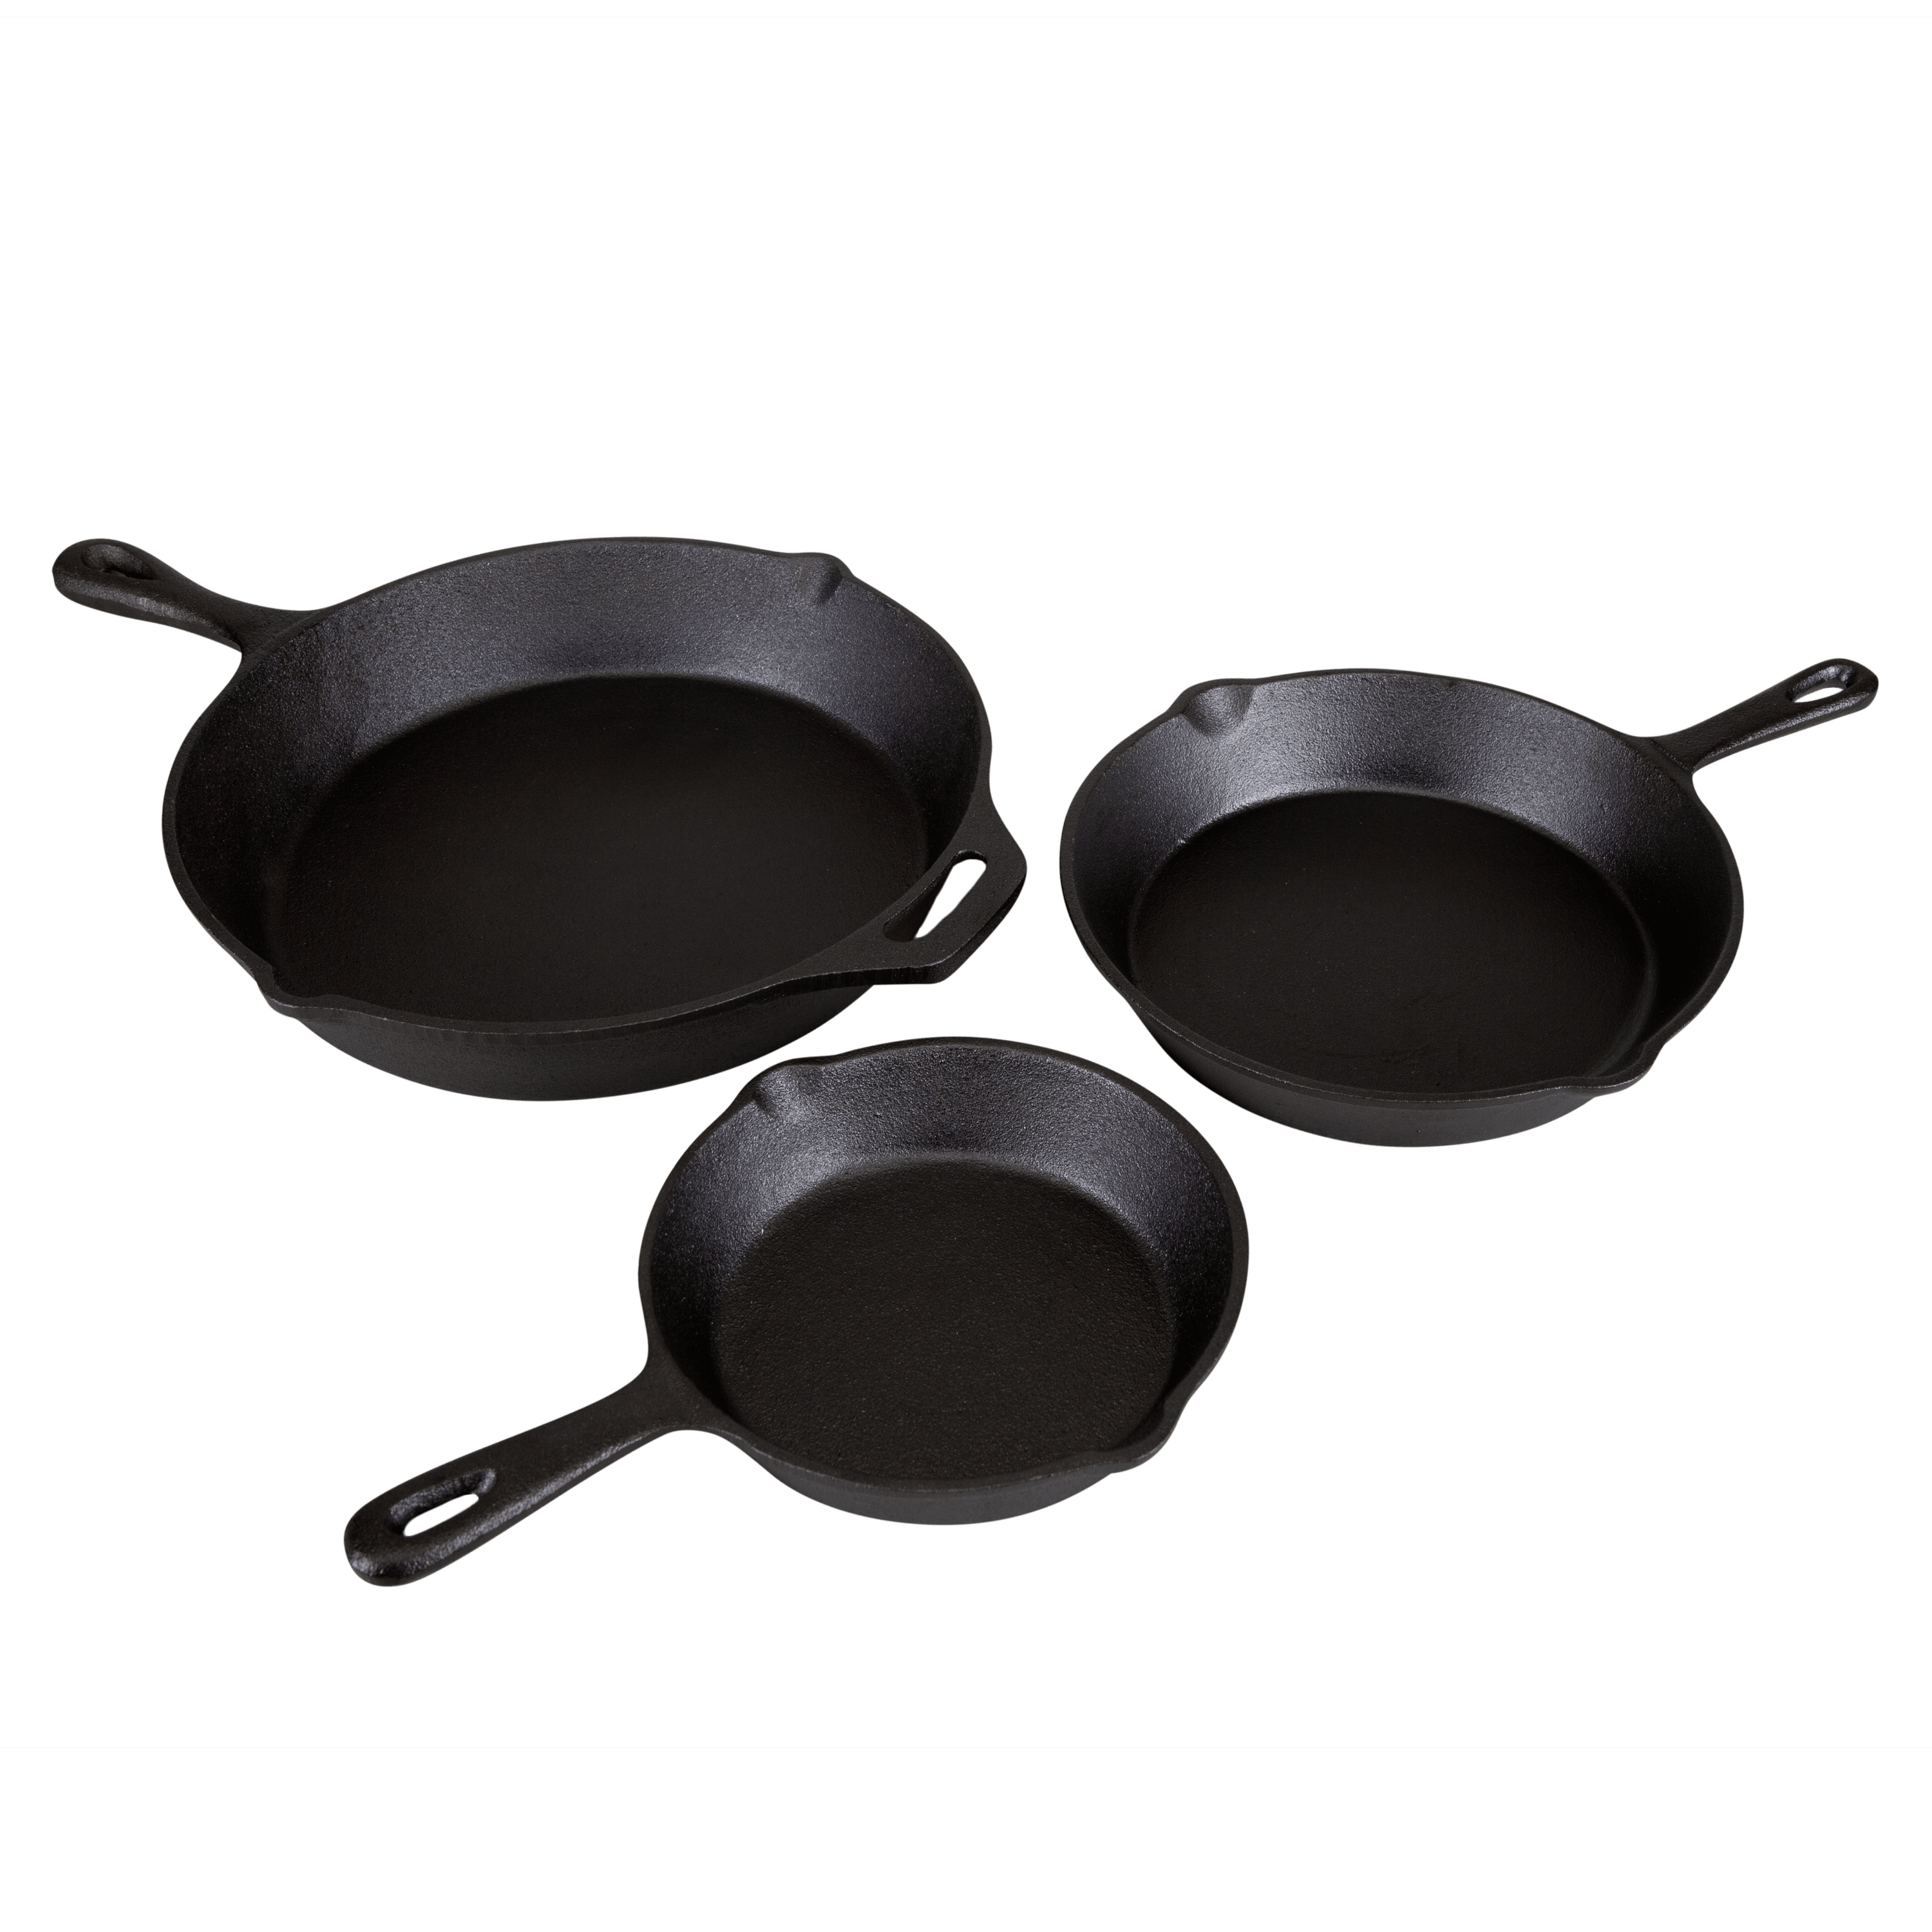 Dropship 3Pcs Pre-Seasoned Cast Iron Skillet Set 6/8/10in Non-Stick Oven  Safe Cookware Heat-Resistant Frying Pan to Sell Online at a Lower Price